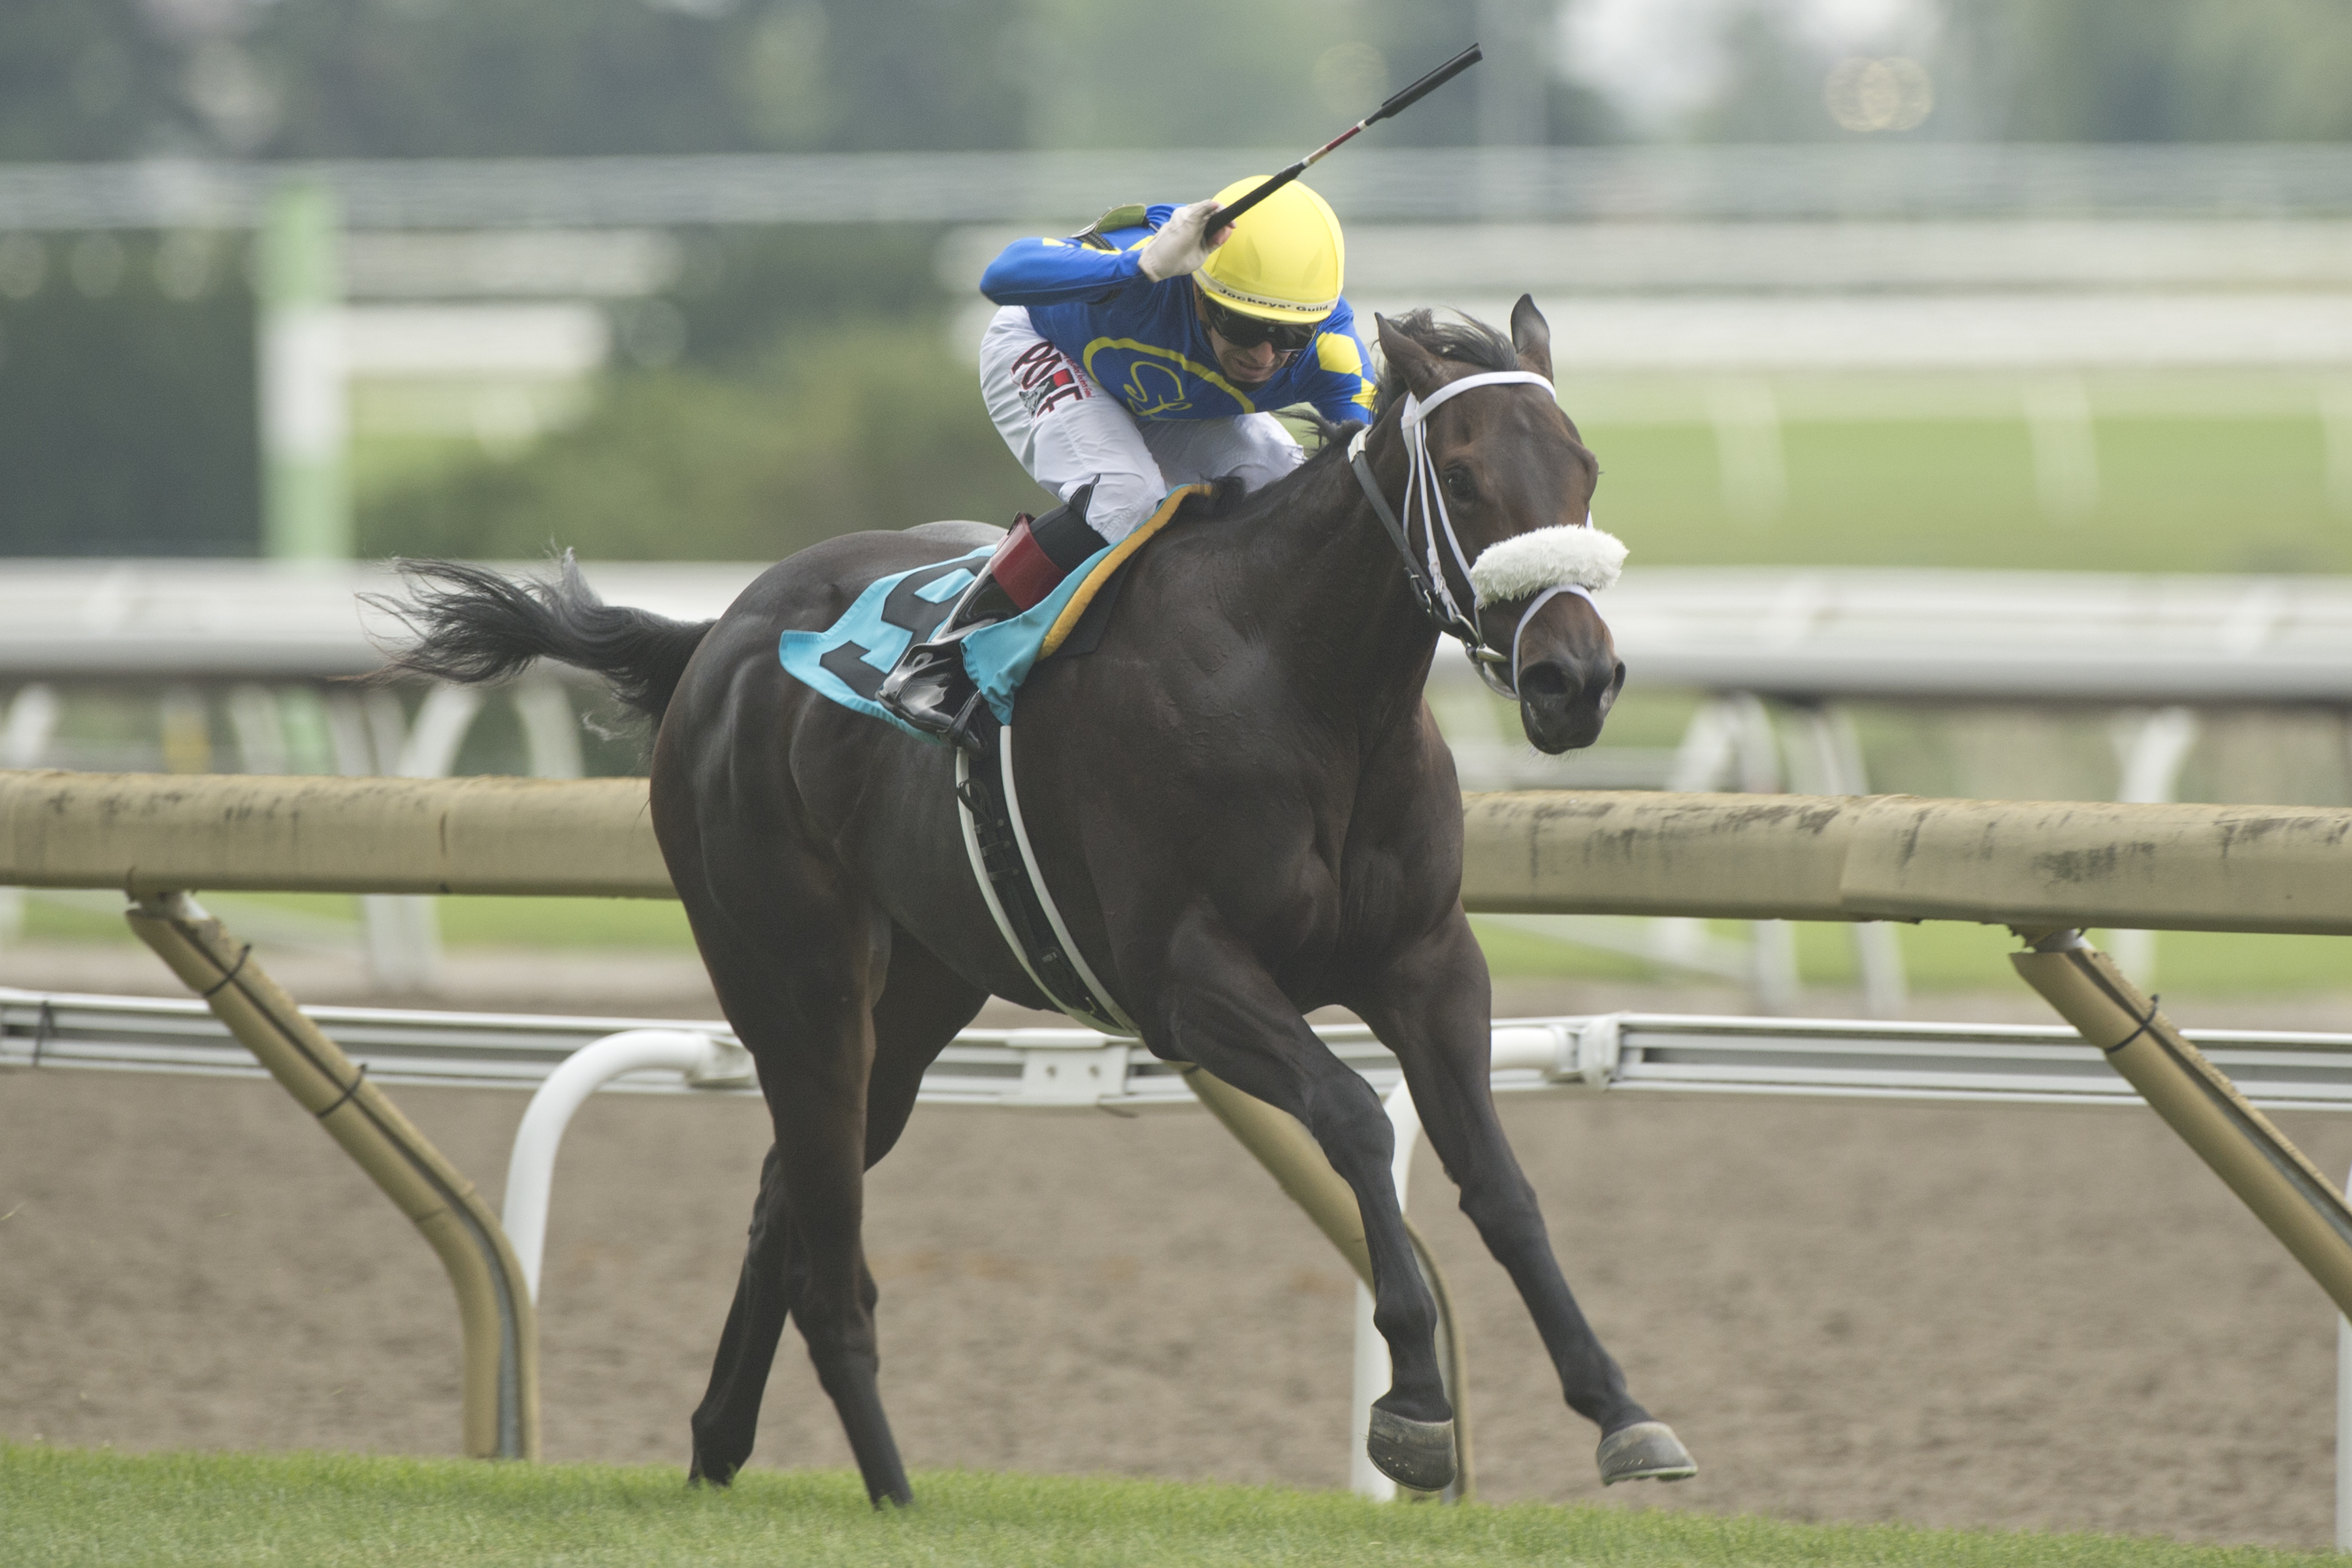 Handicapping Woodbine's G1 Turf Champions and $250,000 Pick 5